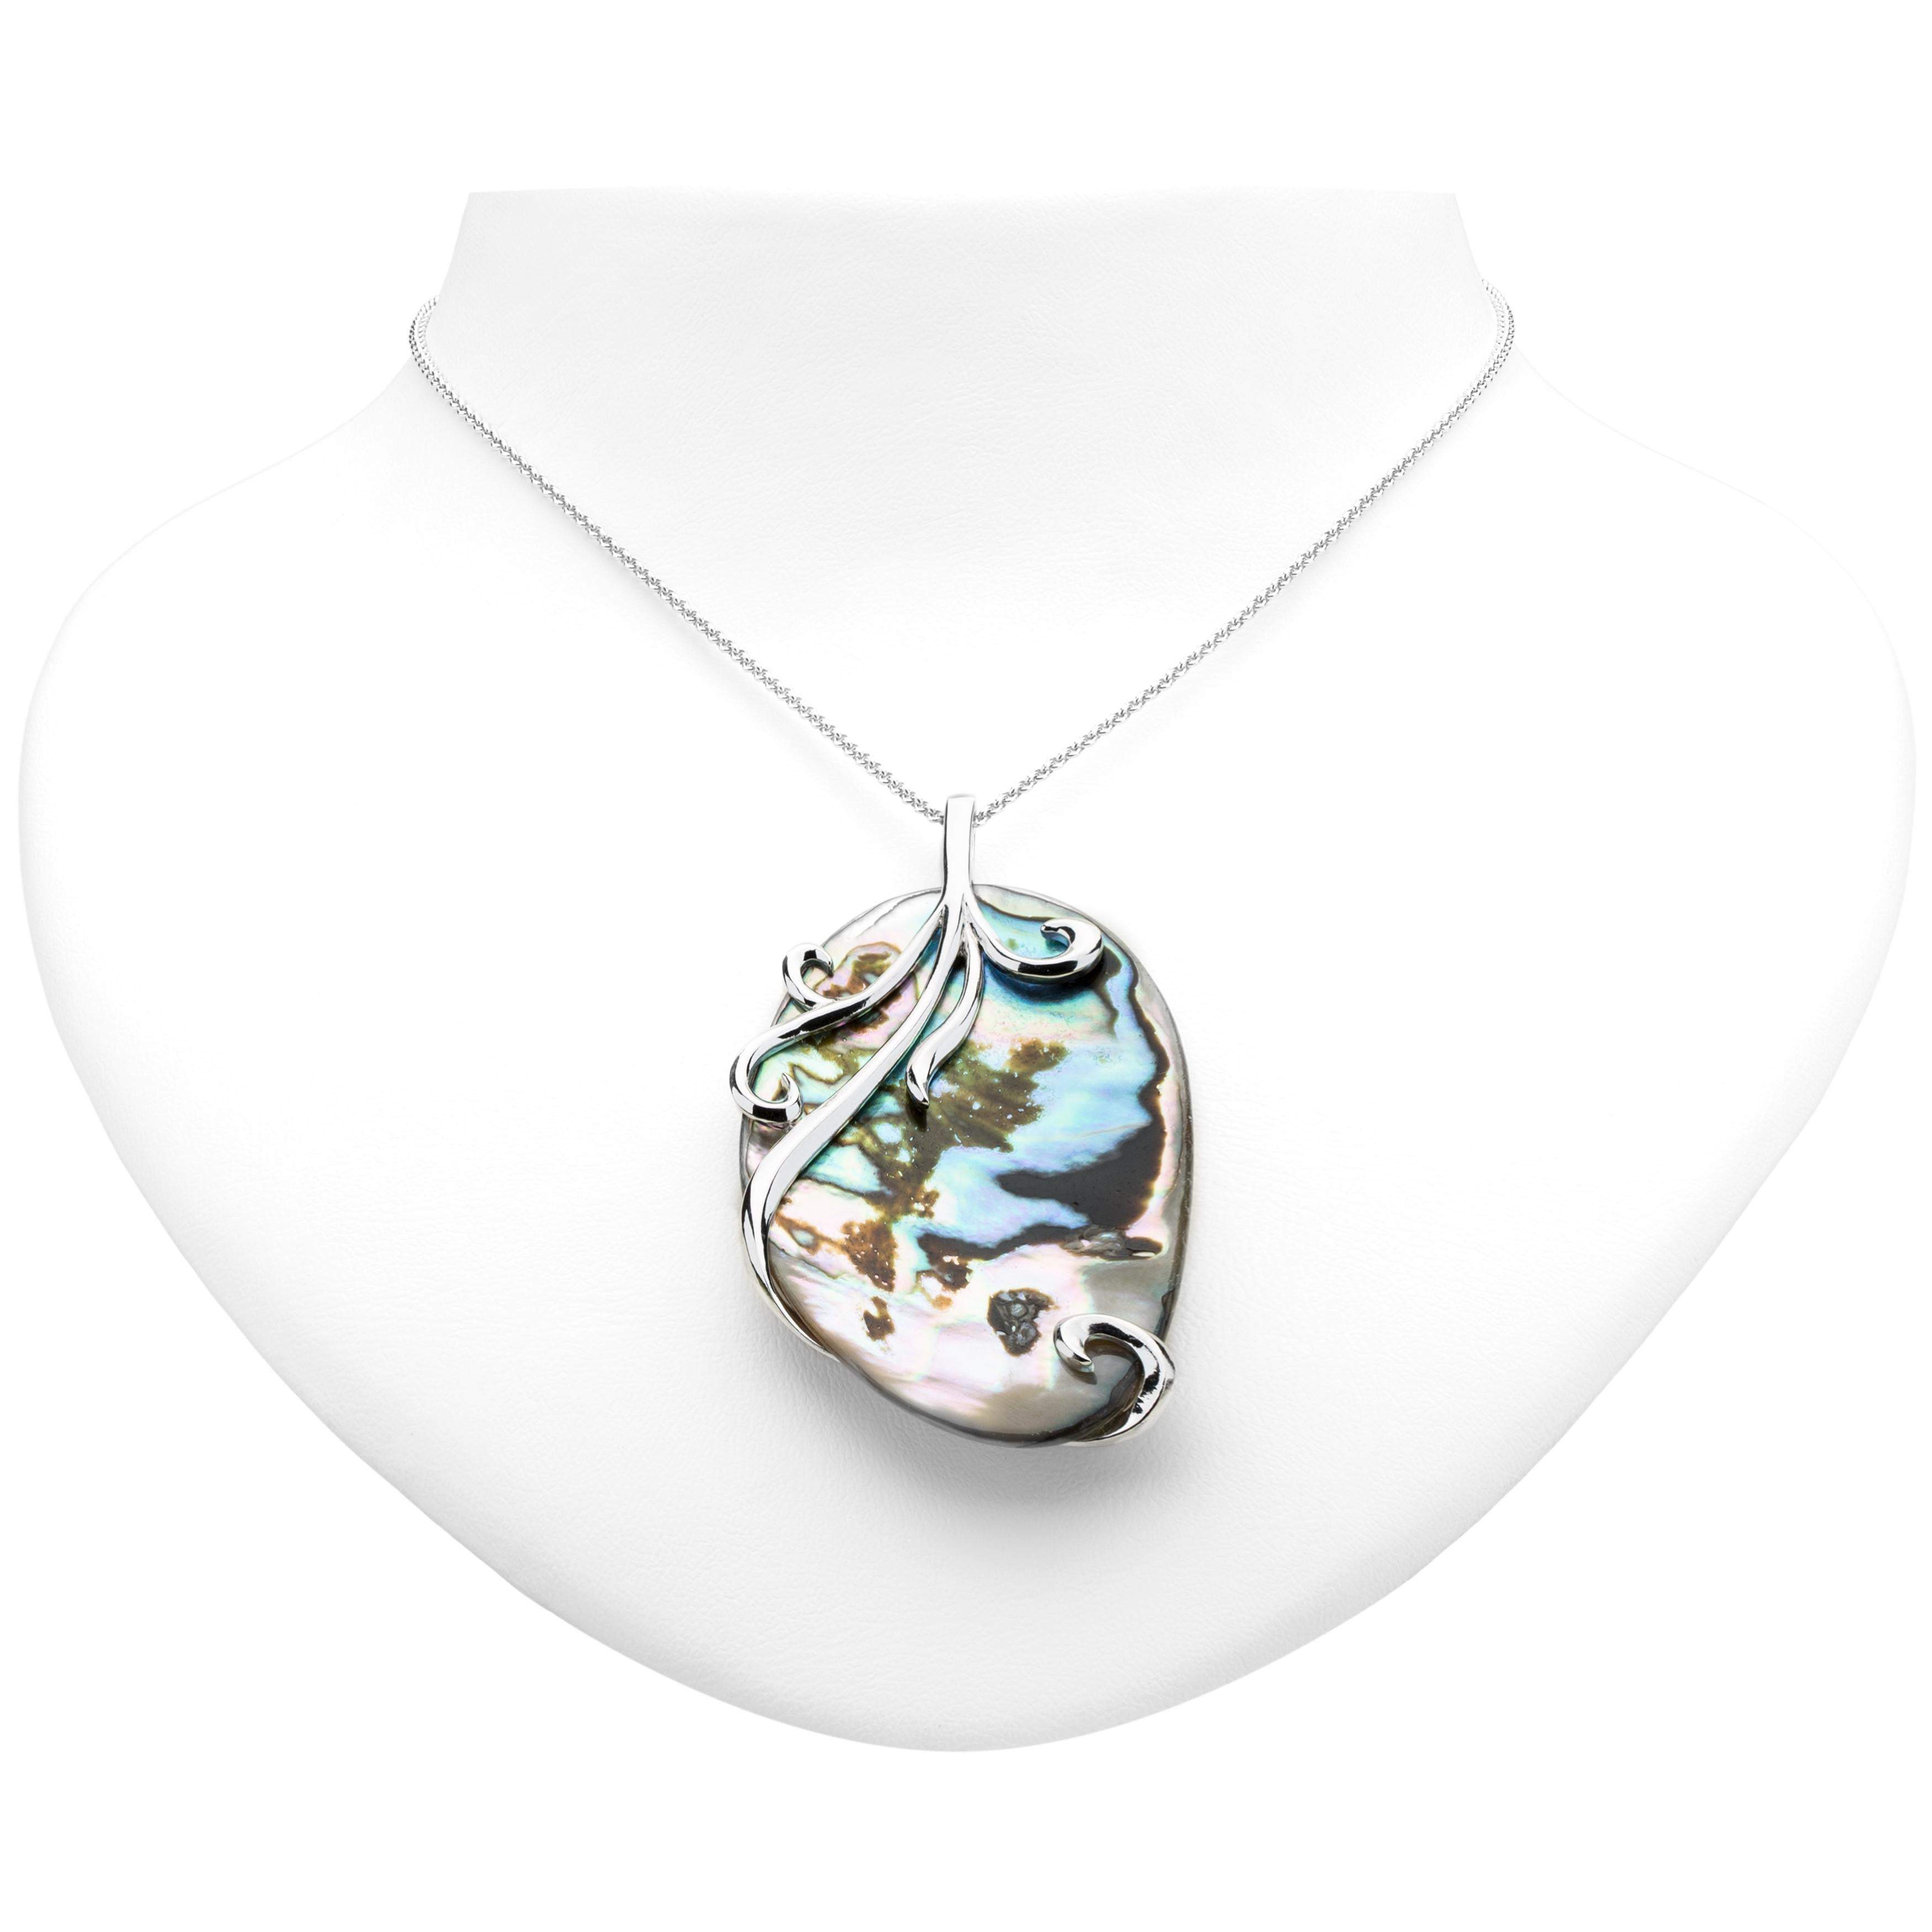 Sterling Silver Large Abalone Overlay 18" Pendant Necklace - Shop Thrifty Treasures